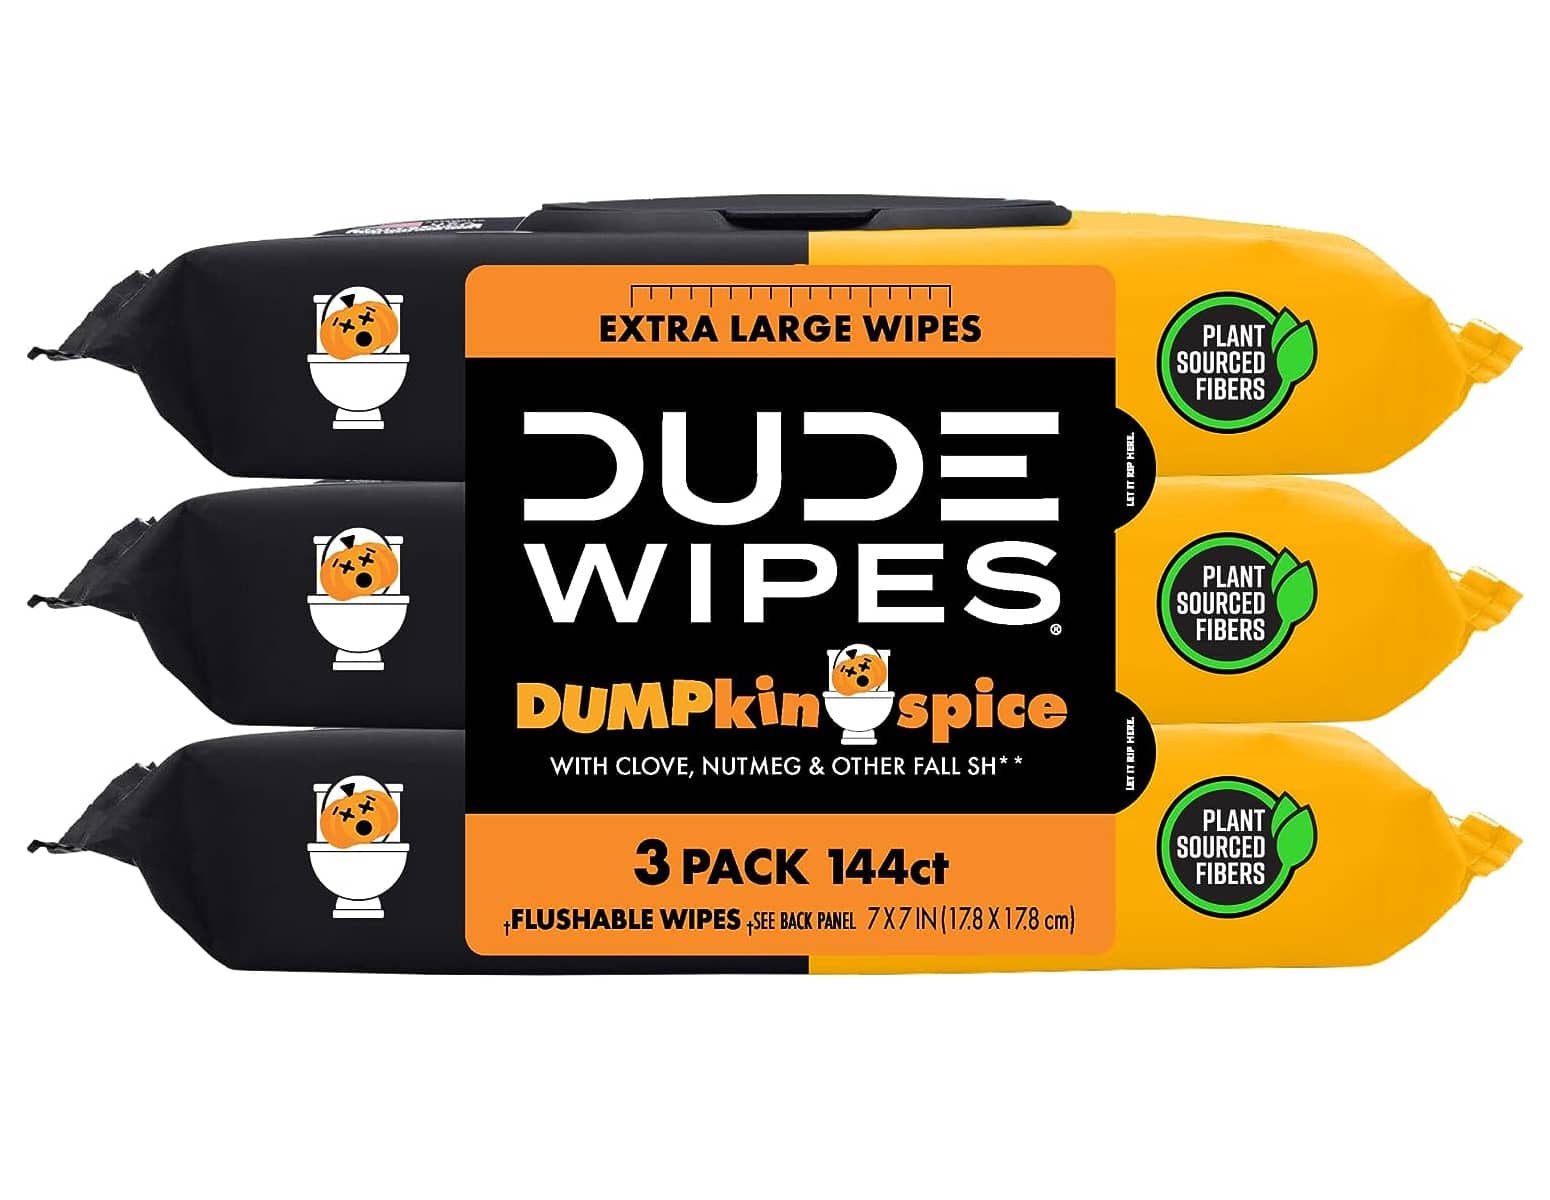 DUDE Wipes Pumpkin Spice Flushable Wipes